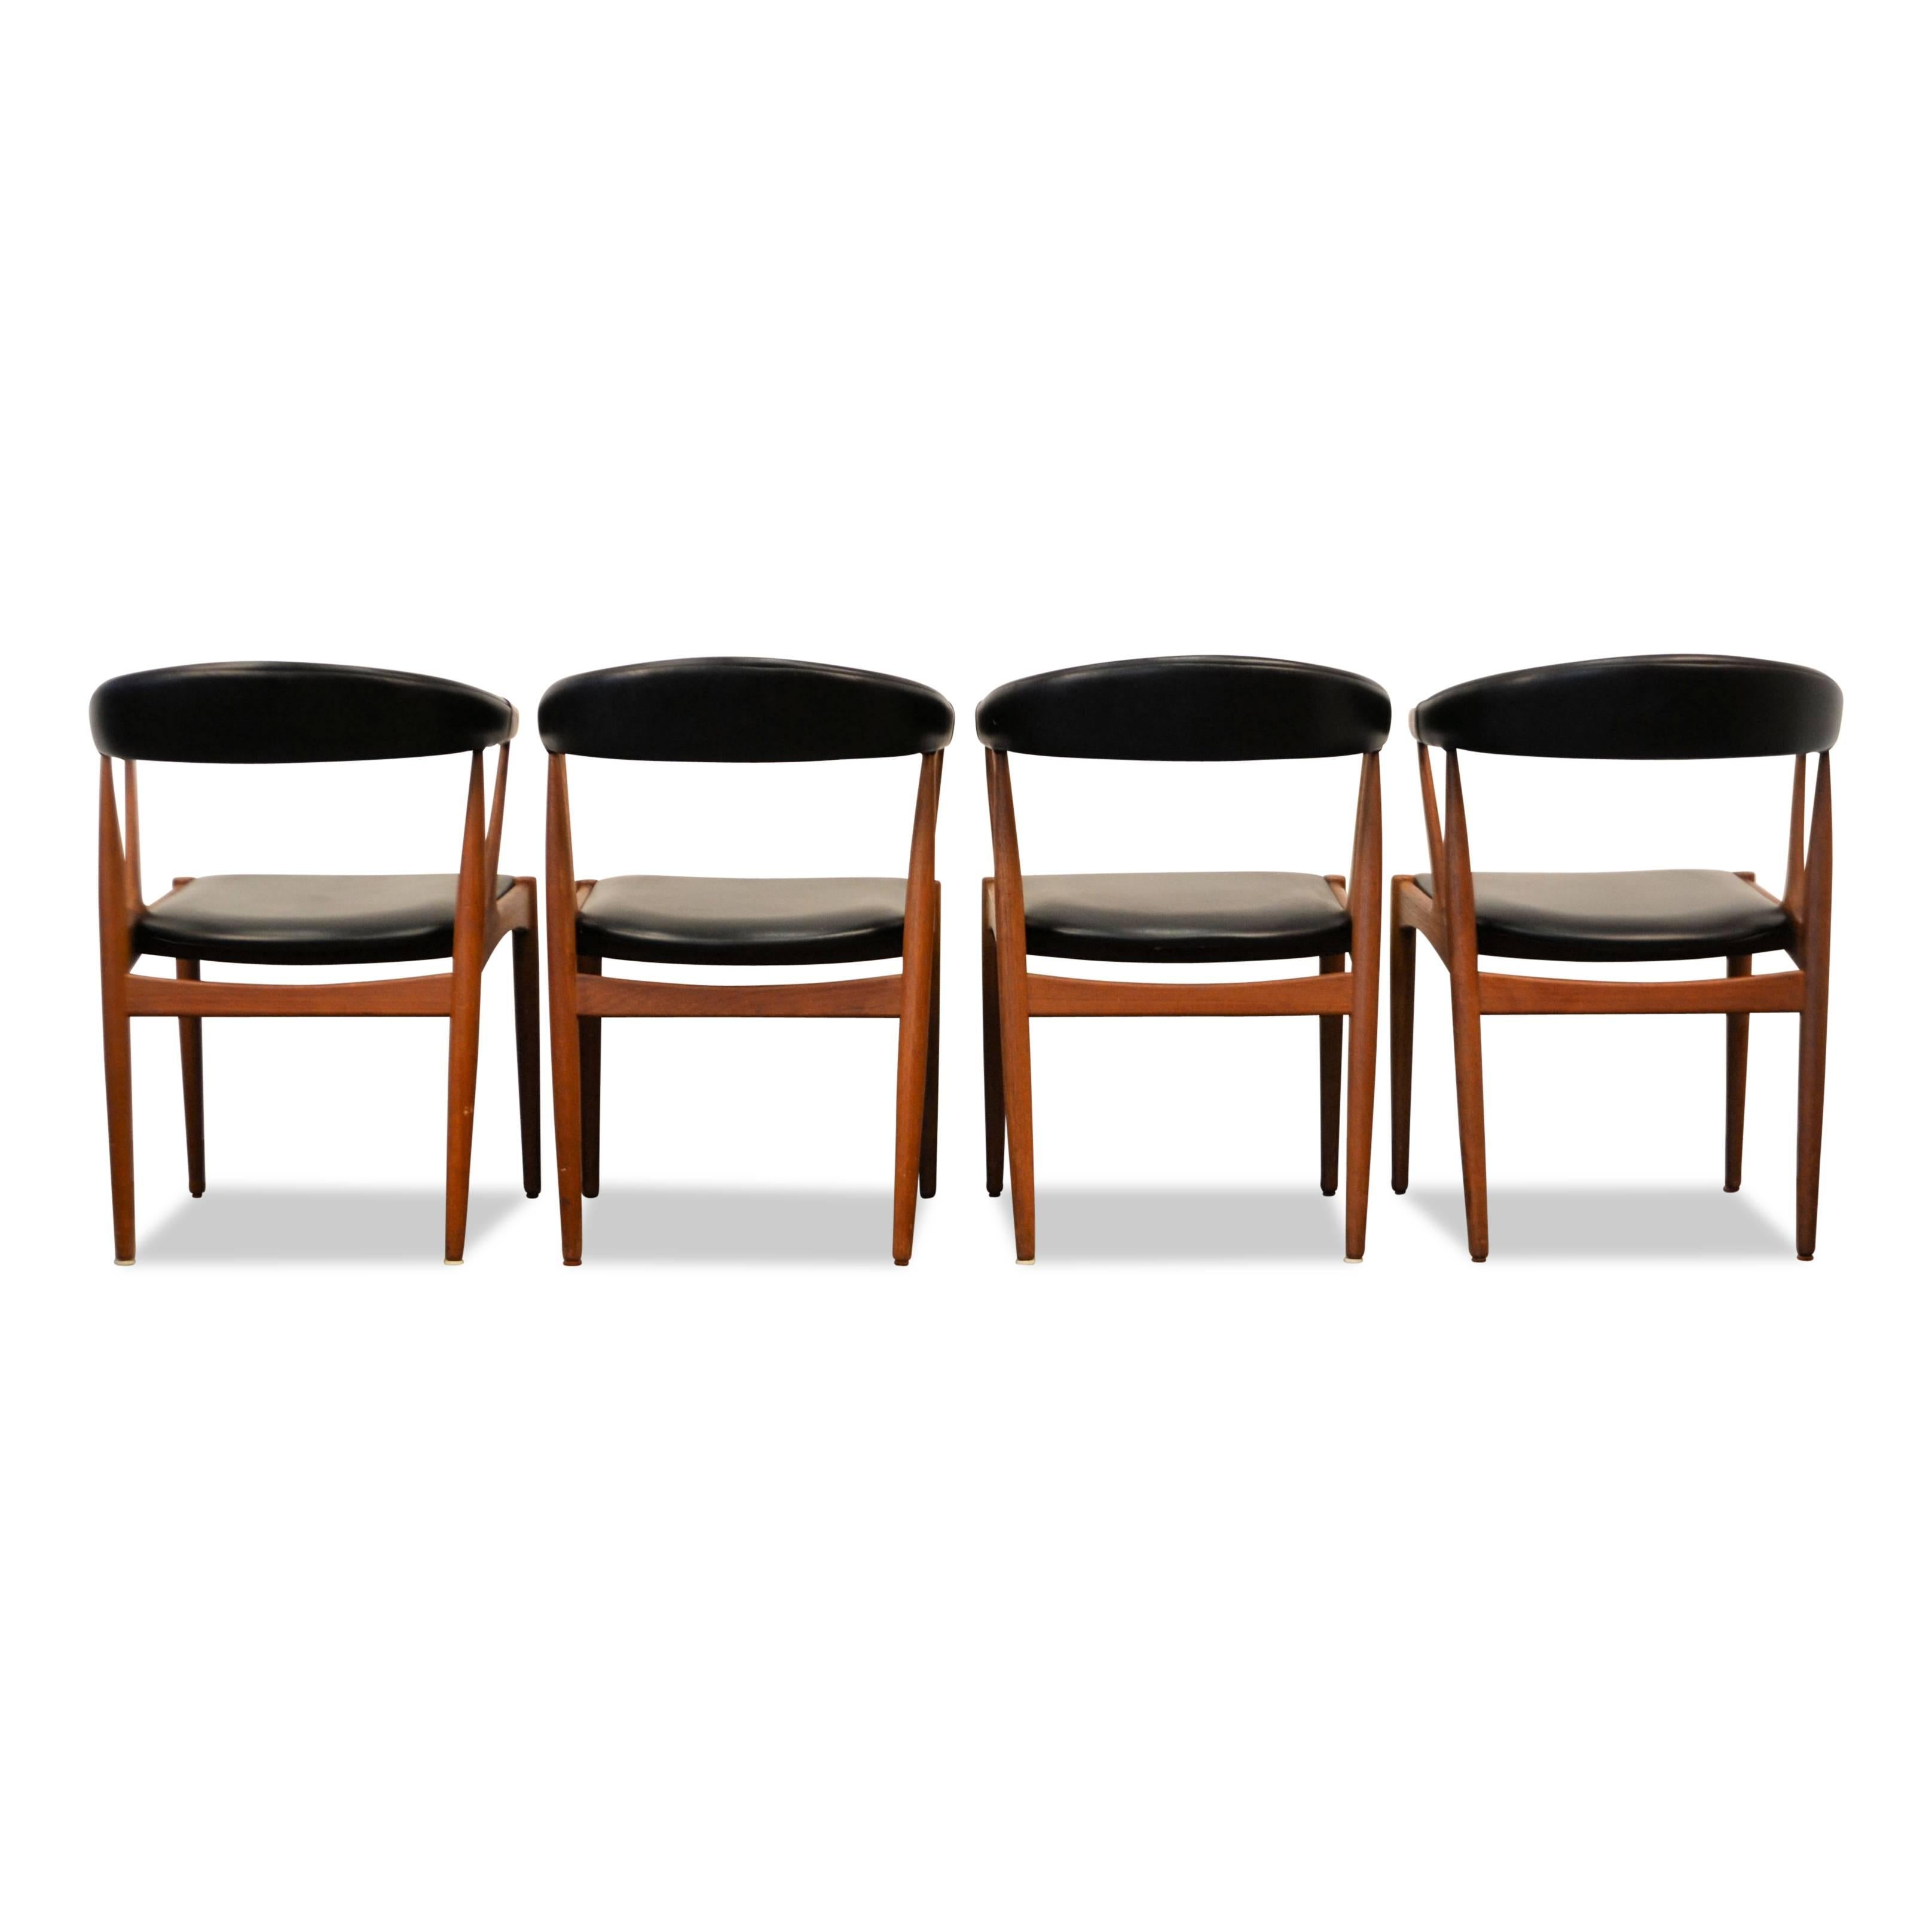 Mid-Century Modern Johannes Andersen Teak Dining Chairs, Set of Four For Sale